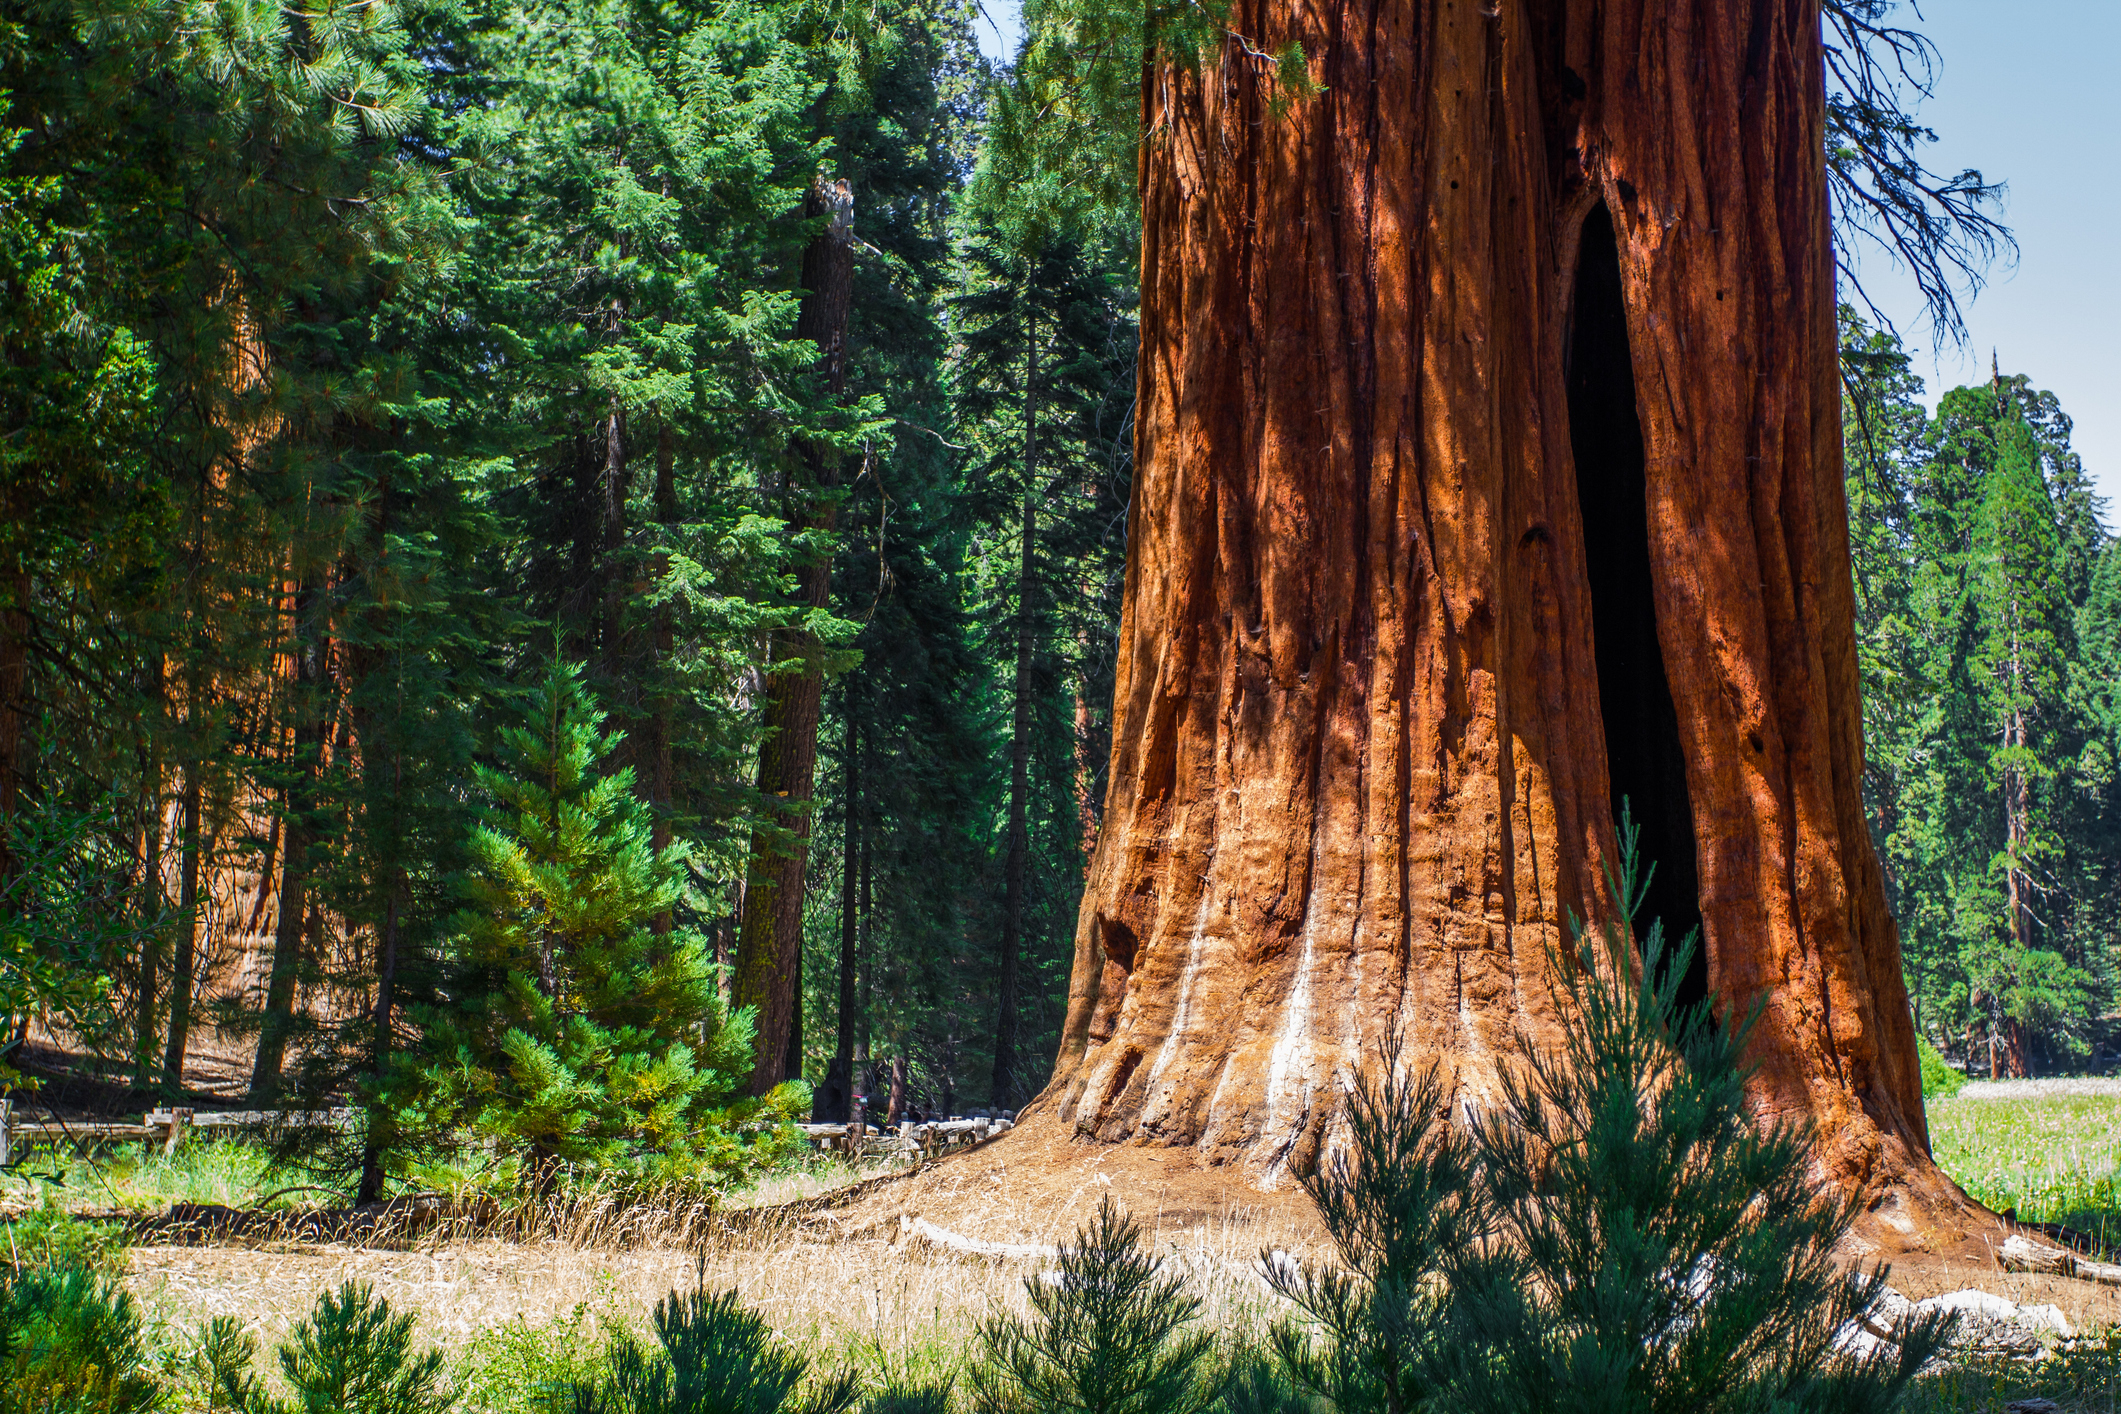 Giant sequoia tree trunk in a forest with smaller trees around